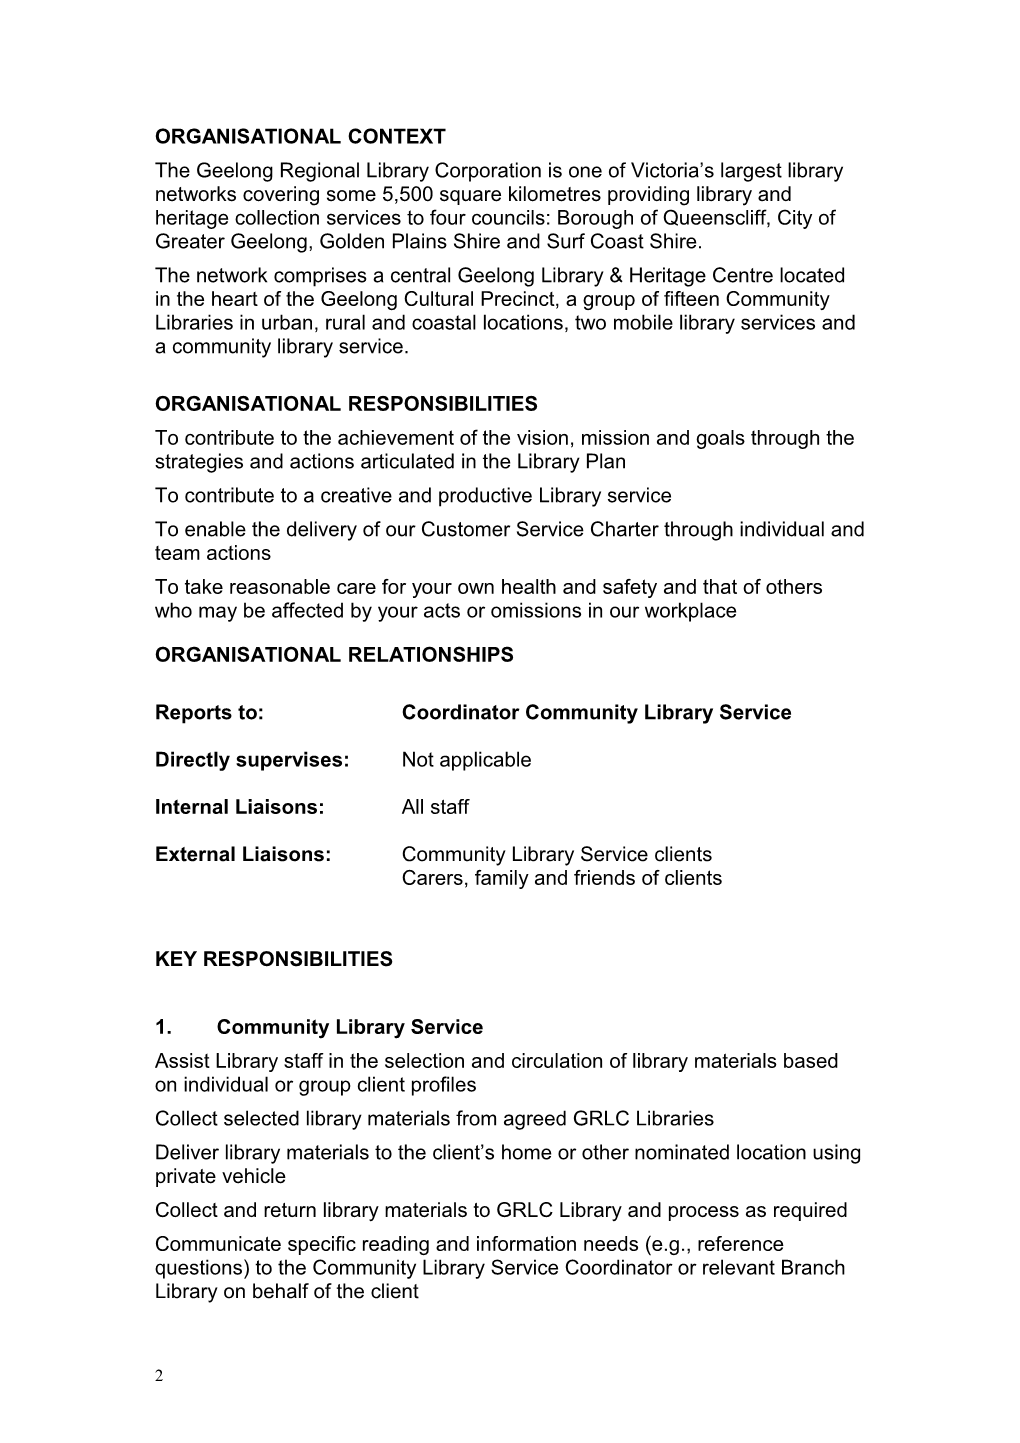 POSITION:Community Library Service (CLS) Volunteer